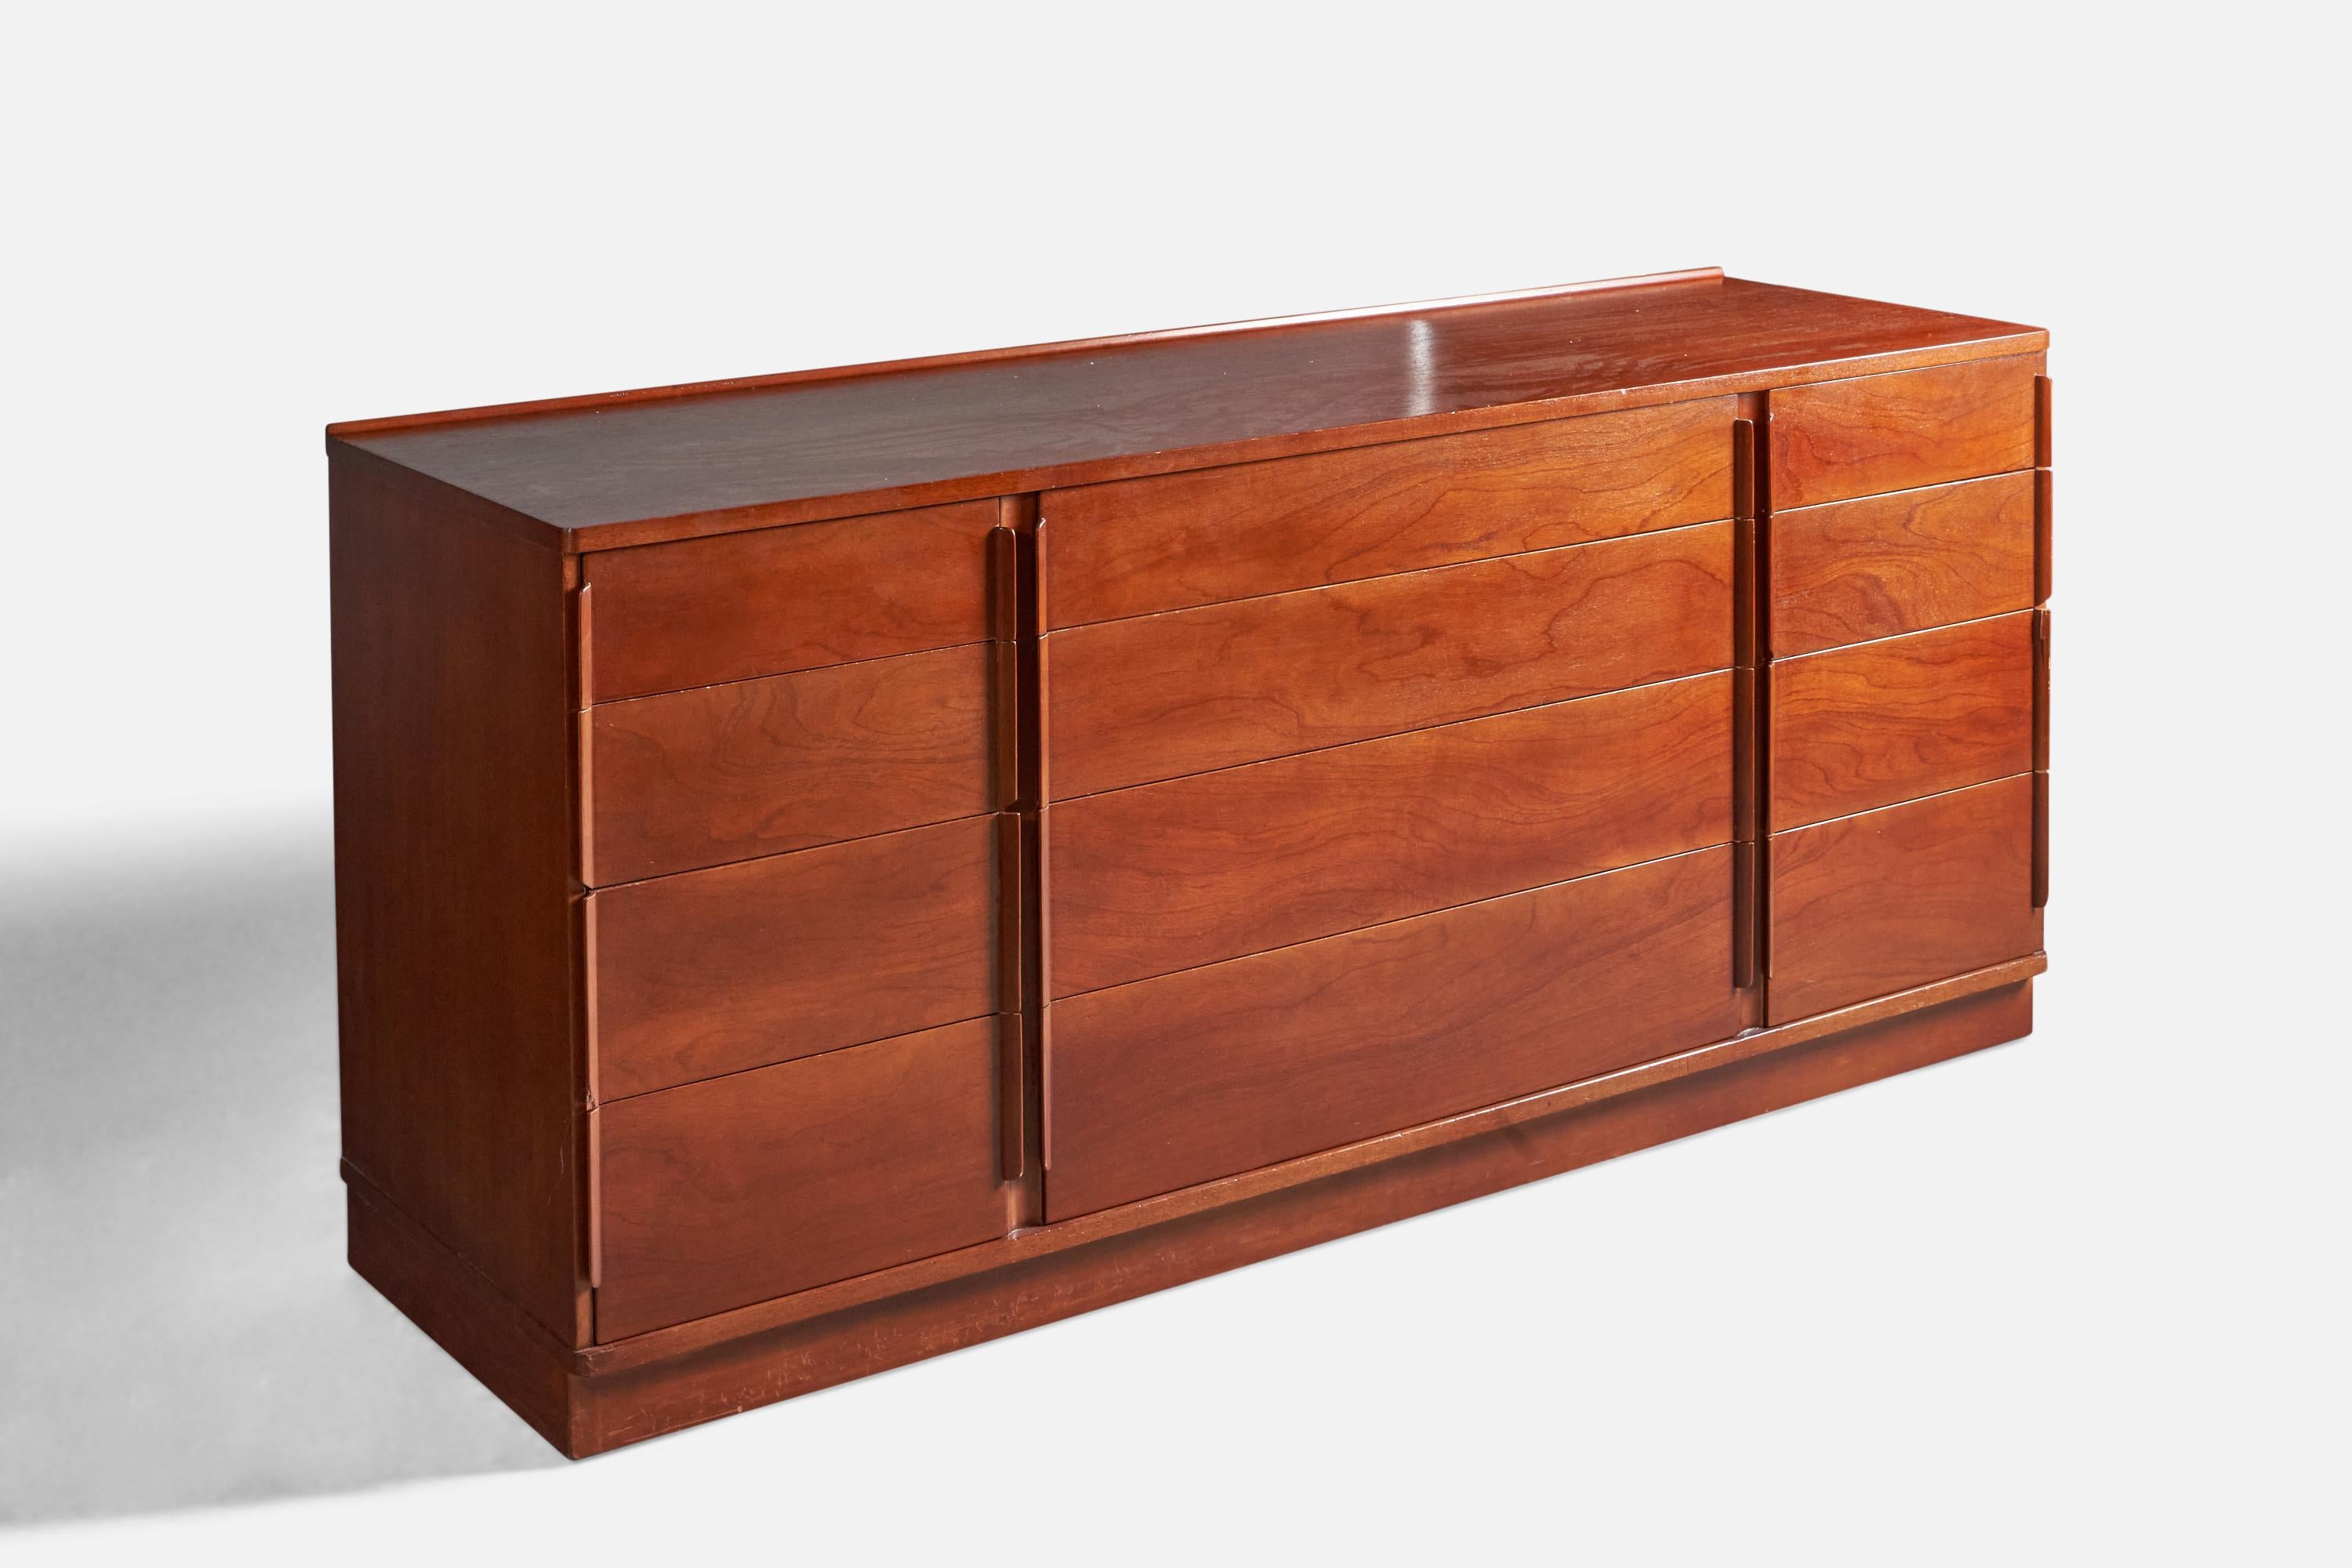 A mahogany chest of drawers or dresser, designed by Edward Wormley and produced by Dunbar, Indiana, USA, c. 1950s.